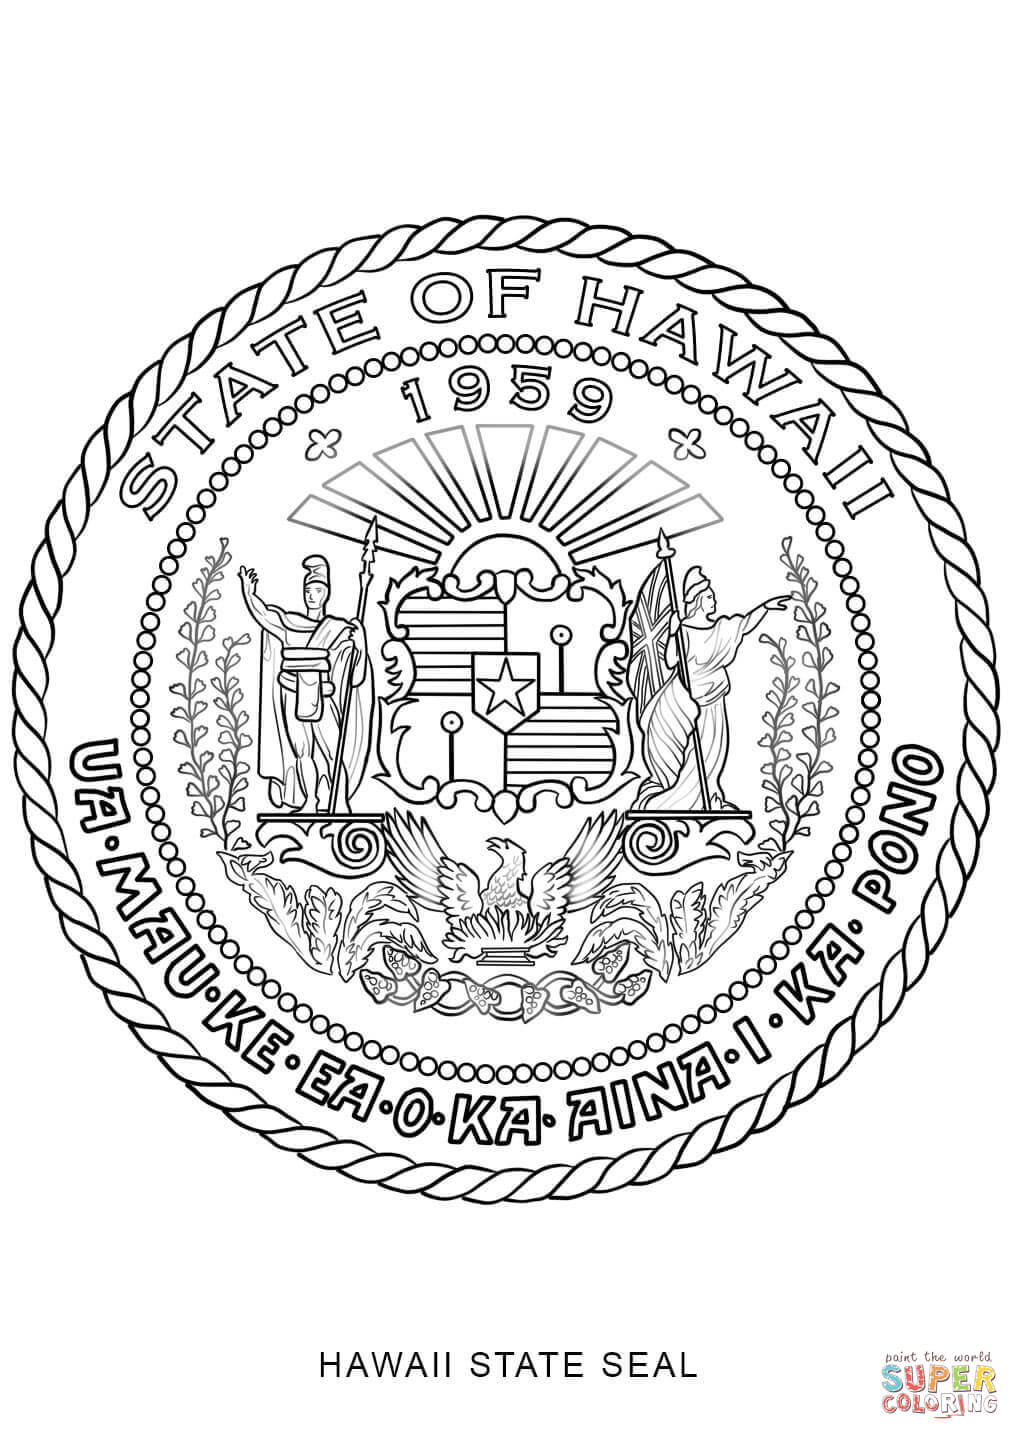 Hawaii State Seal coloring page | Free Printable Coloring Pages